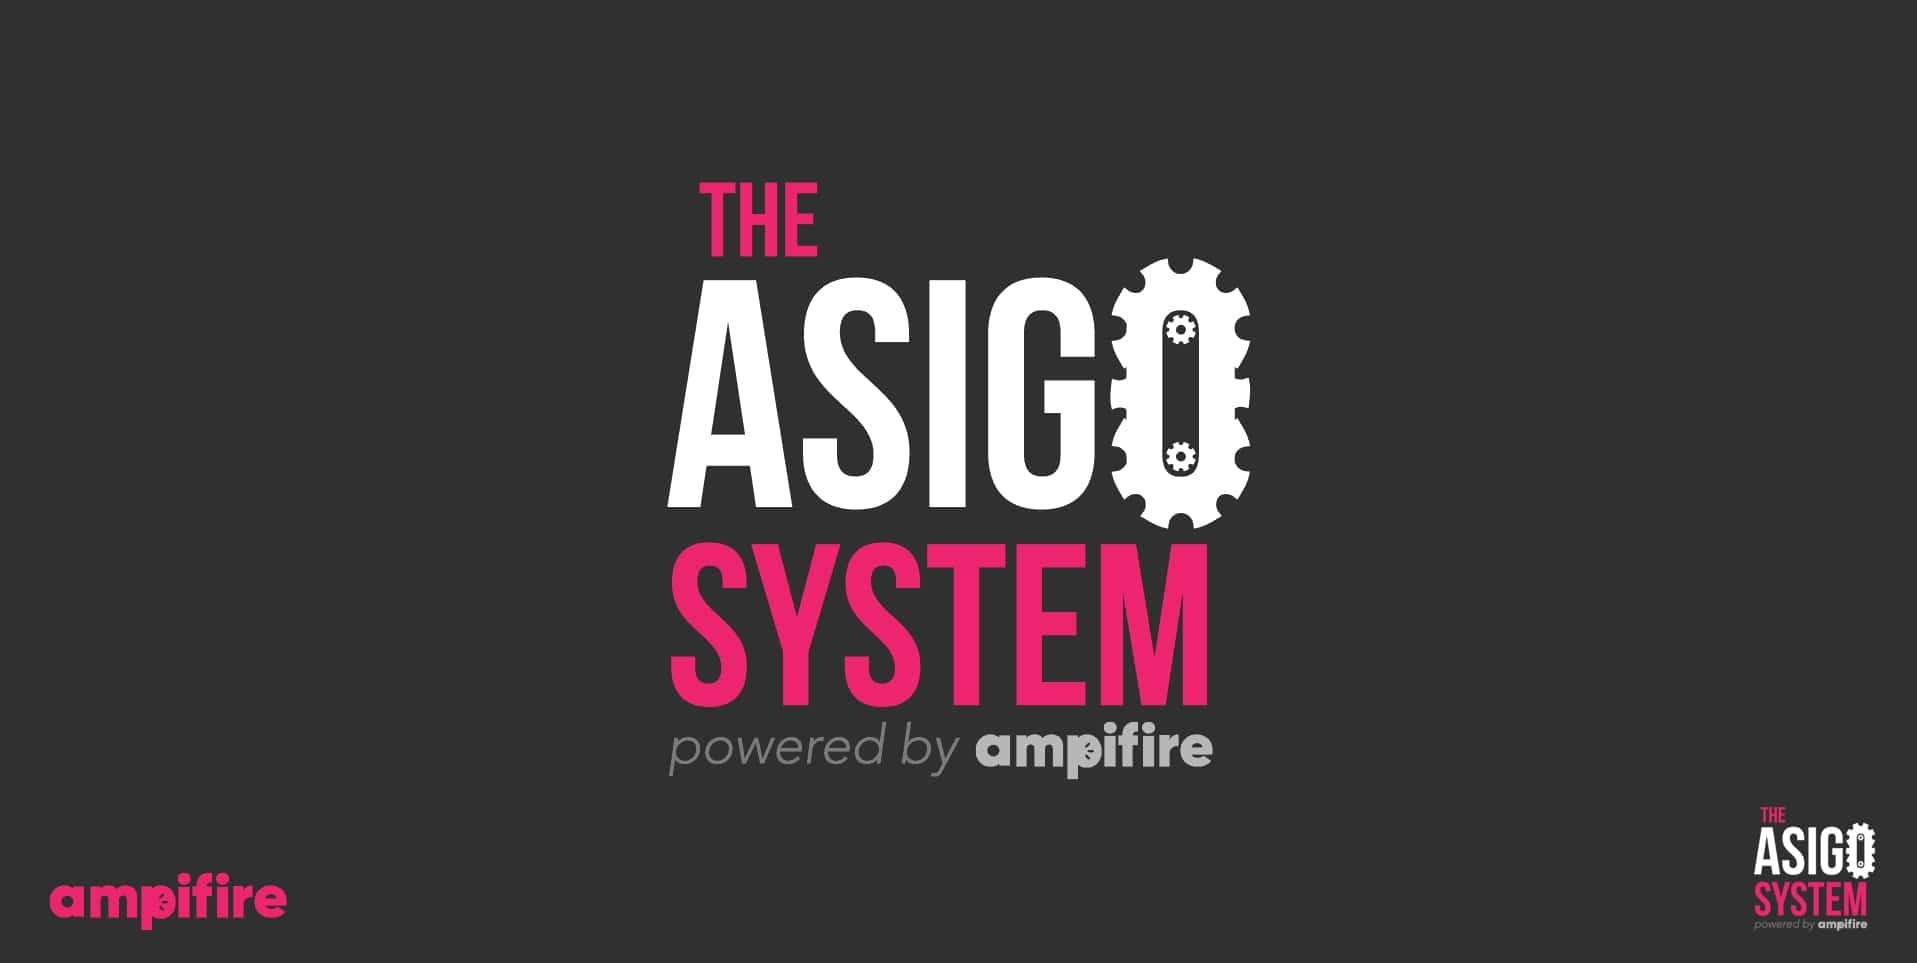 What’s The Best eService Dropshipping & Marketing Course? Try Asigo System!